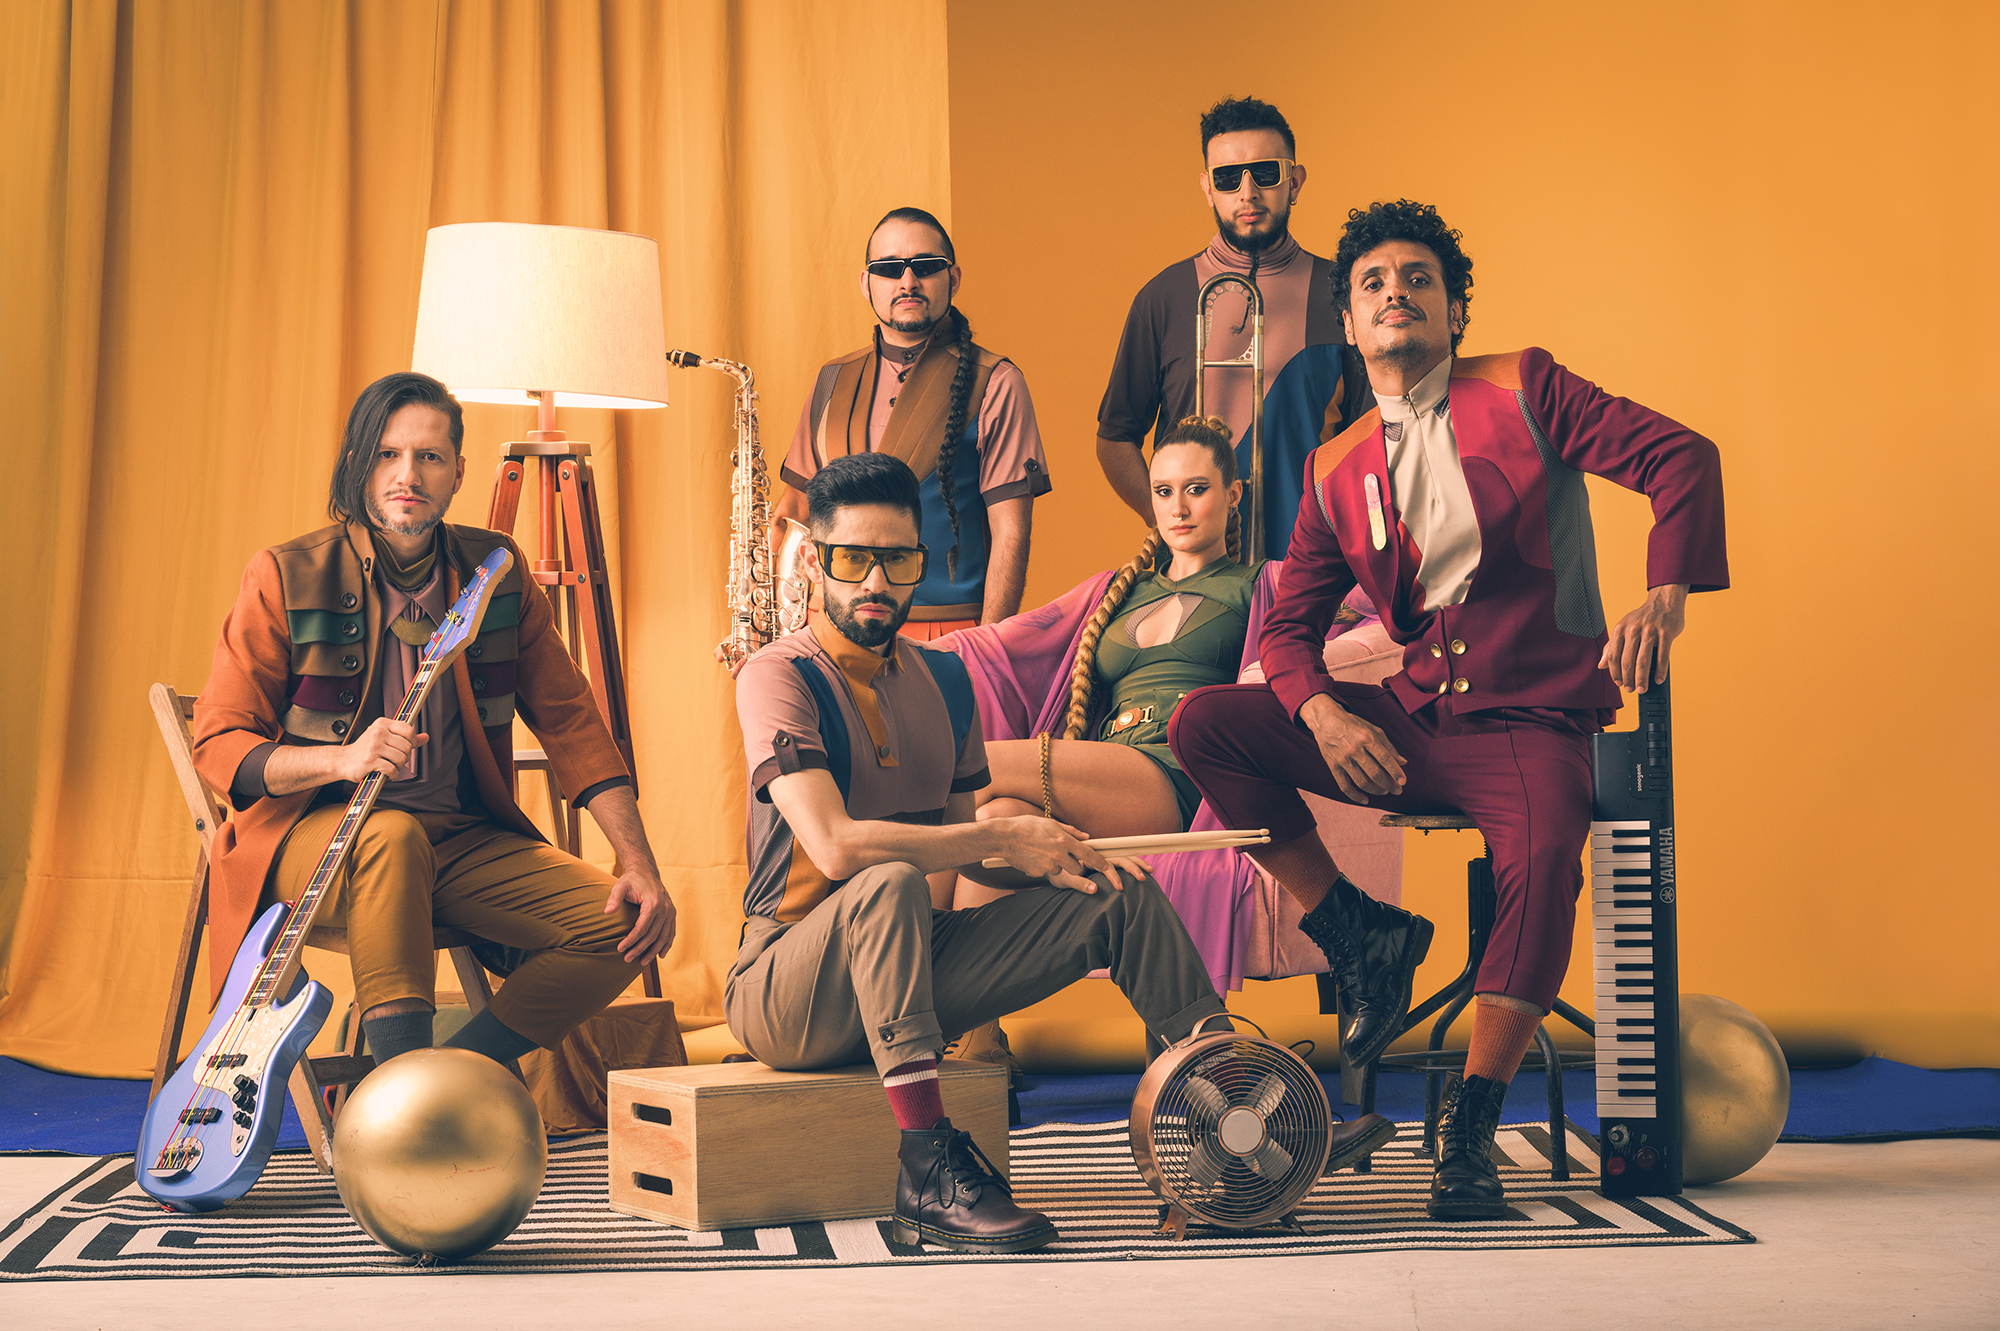 A band of six people with instruments in front of a yellow background.